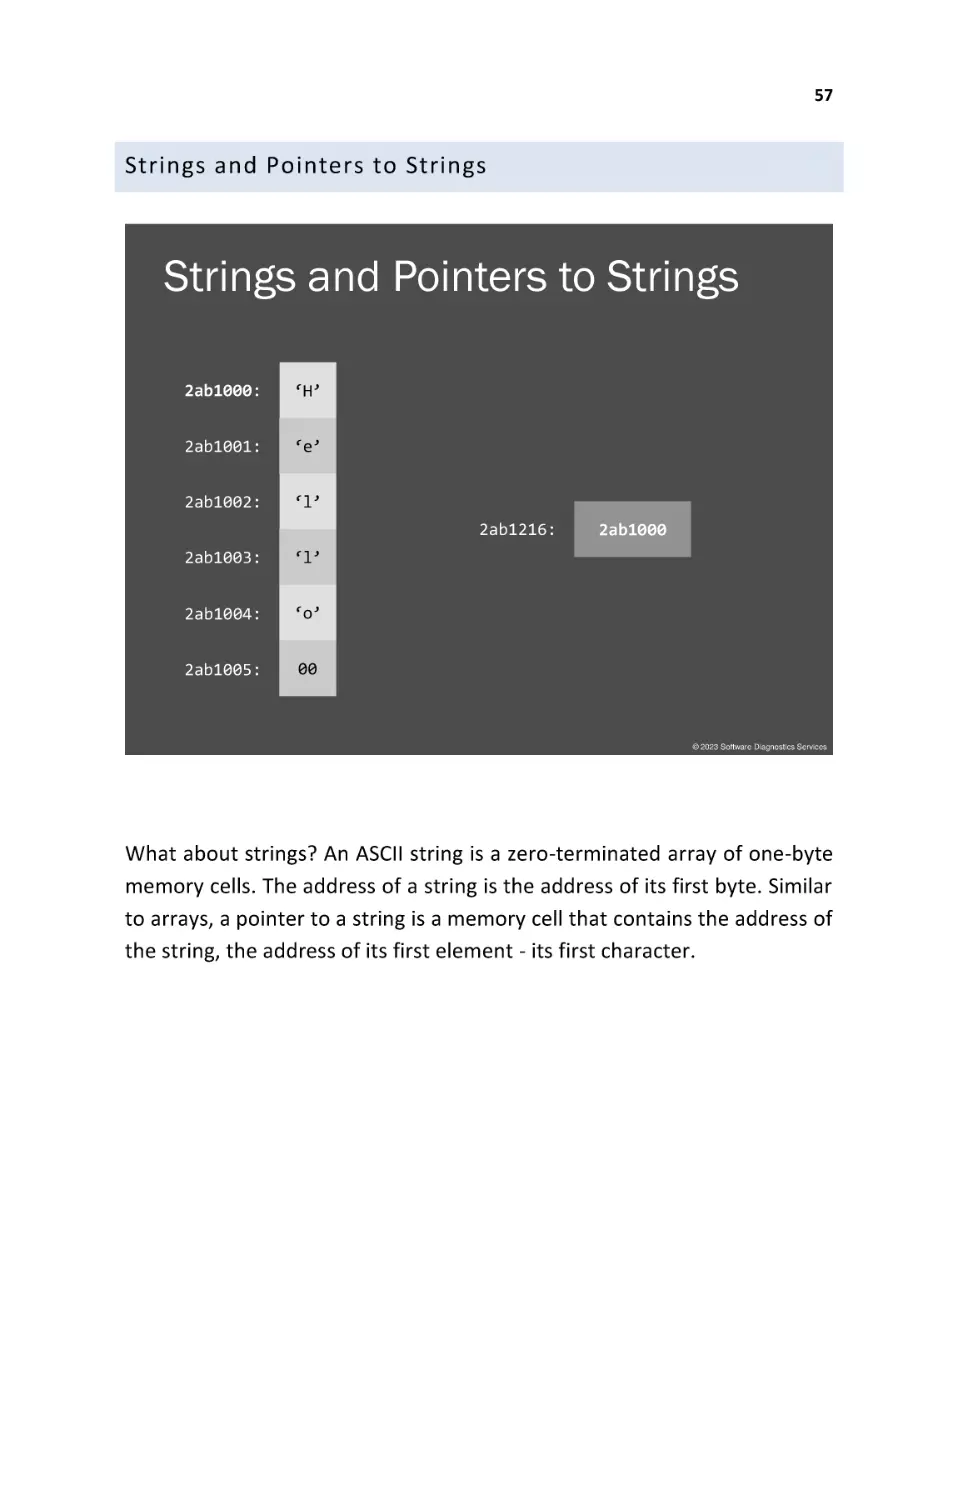 Strings and Pointers to Strings